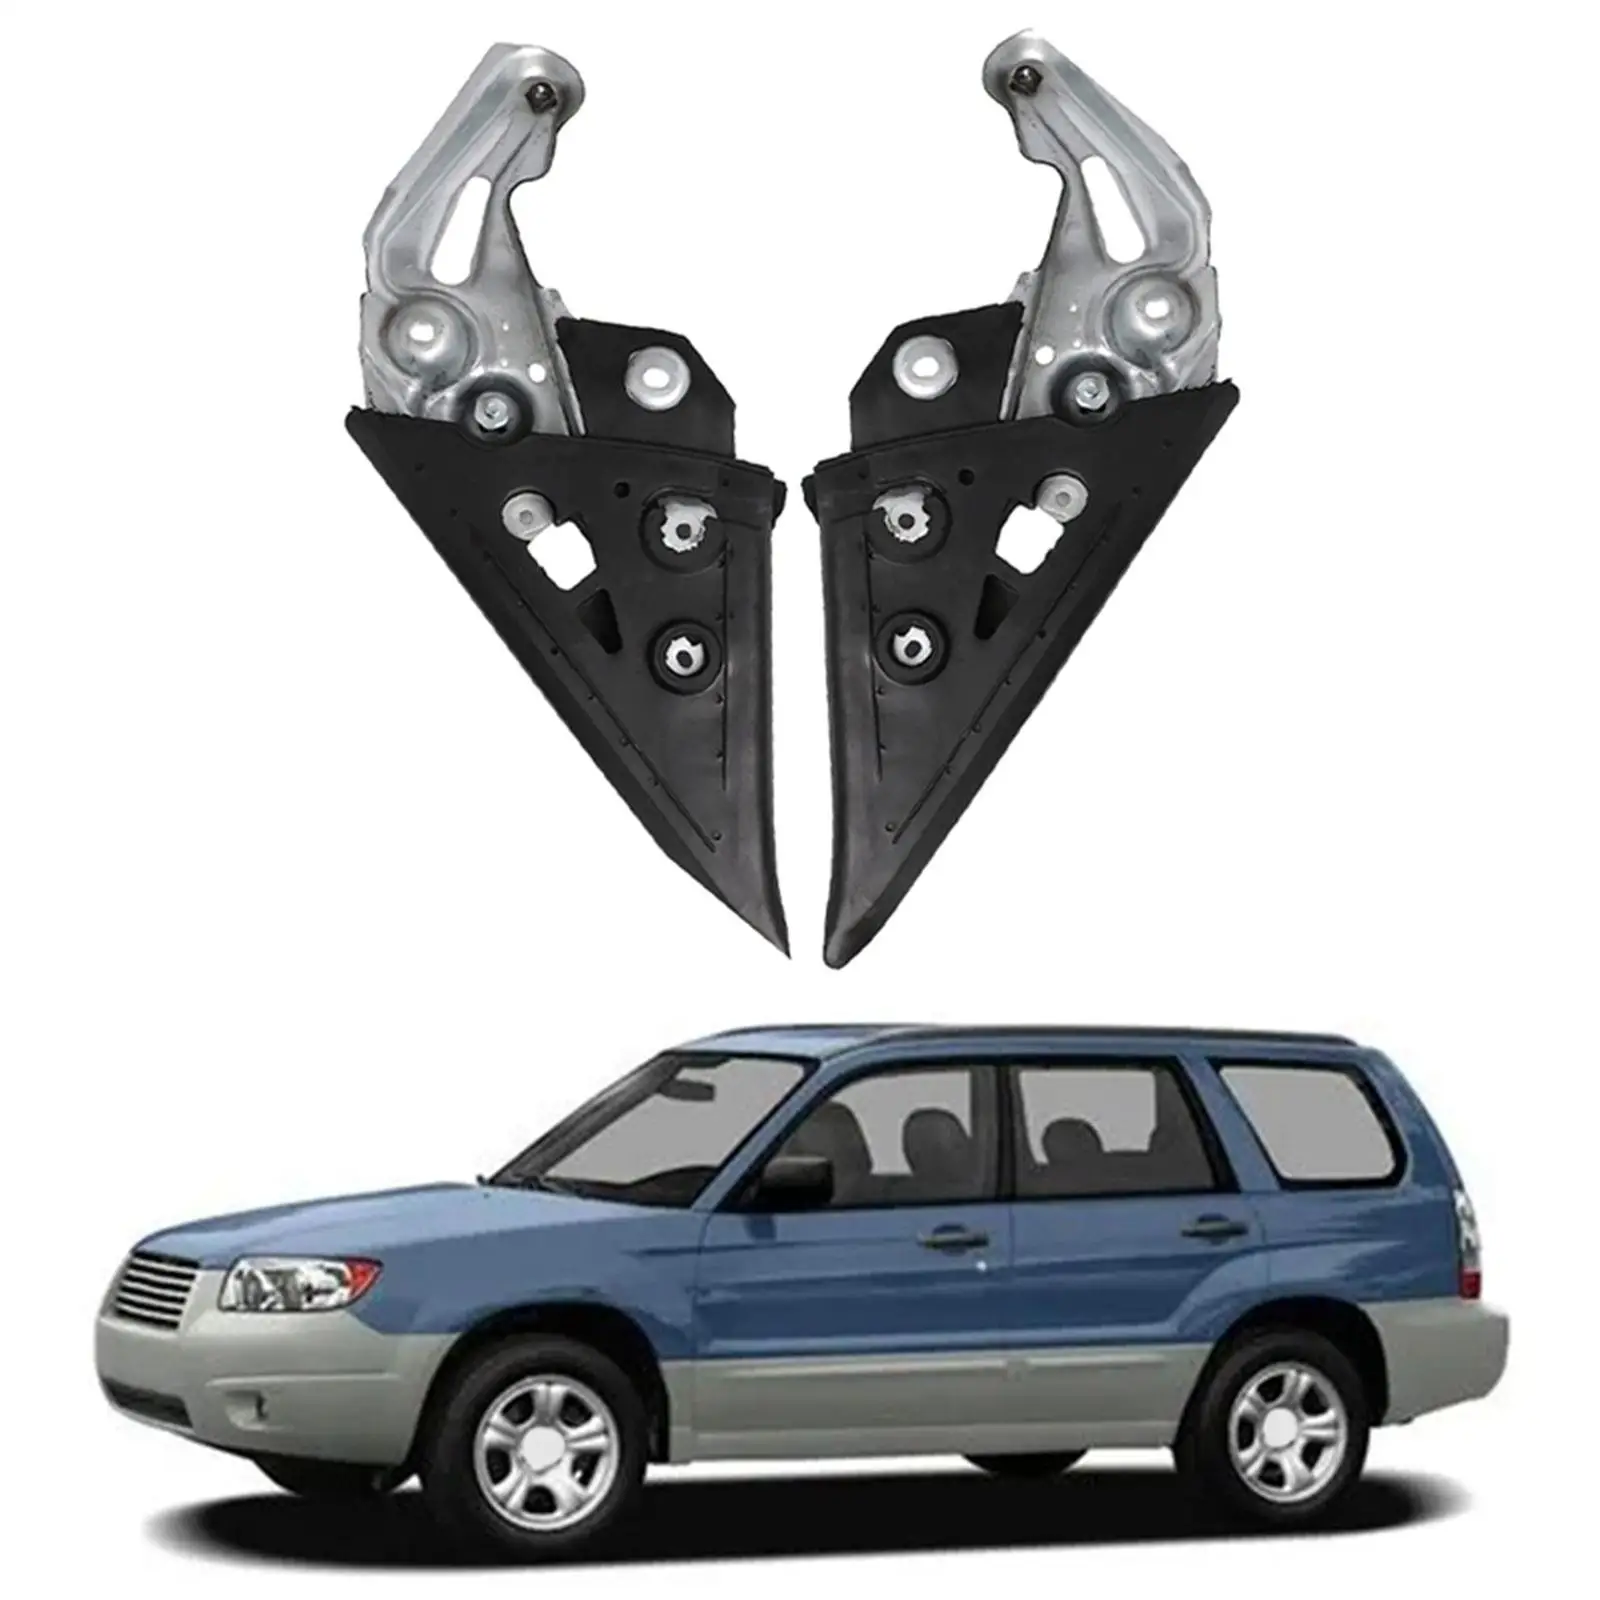 Auto Door Gusset Assembly Set Professional High Strength 2Pcs for Forester 2003-2008 Replaces Accessories Assembly